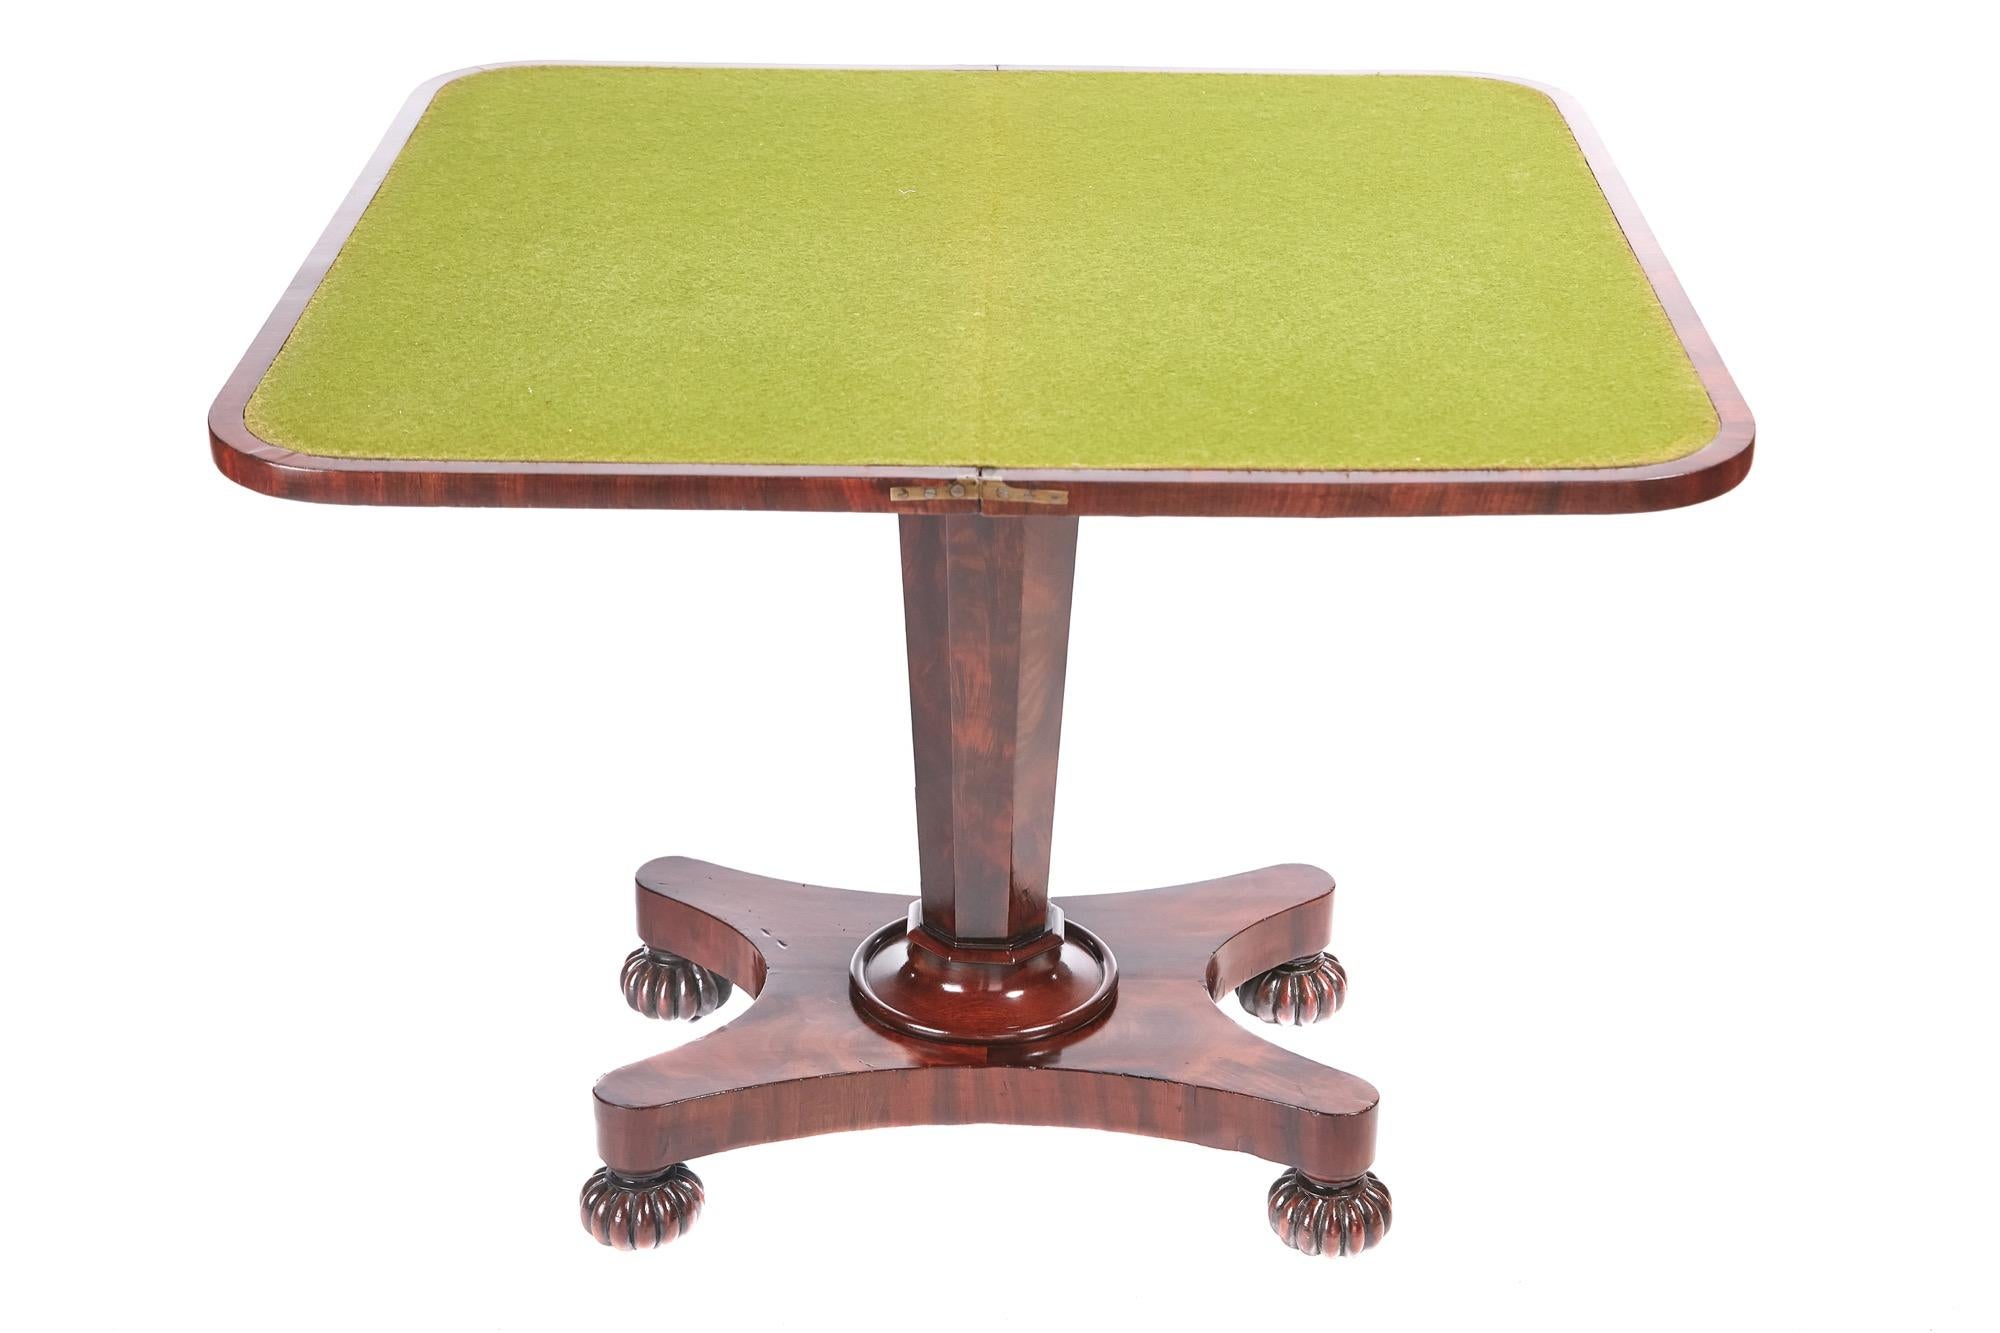 This is a quality 19th century Victorian antique mahogany card table with a lovely mahogany top that lifts up and swivels to reveal a green baize interior. It has a very attractive shaped frieze supported by a shaped turned pedestal with a collar